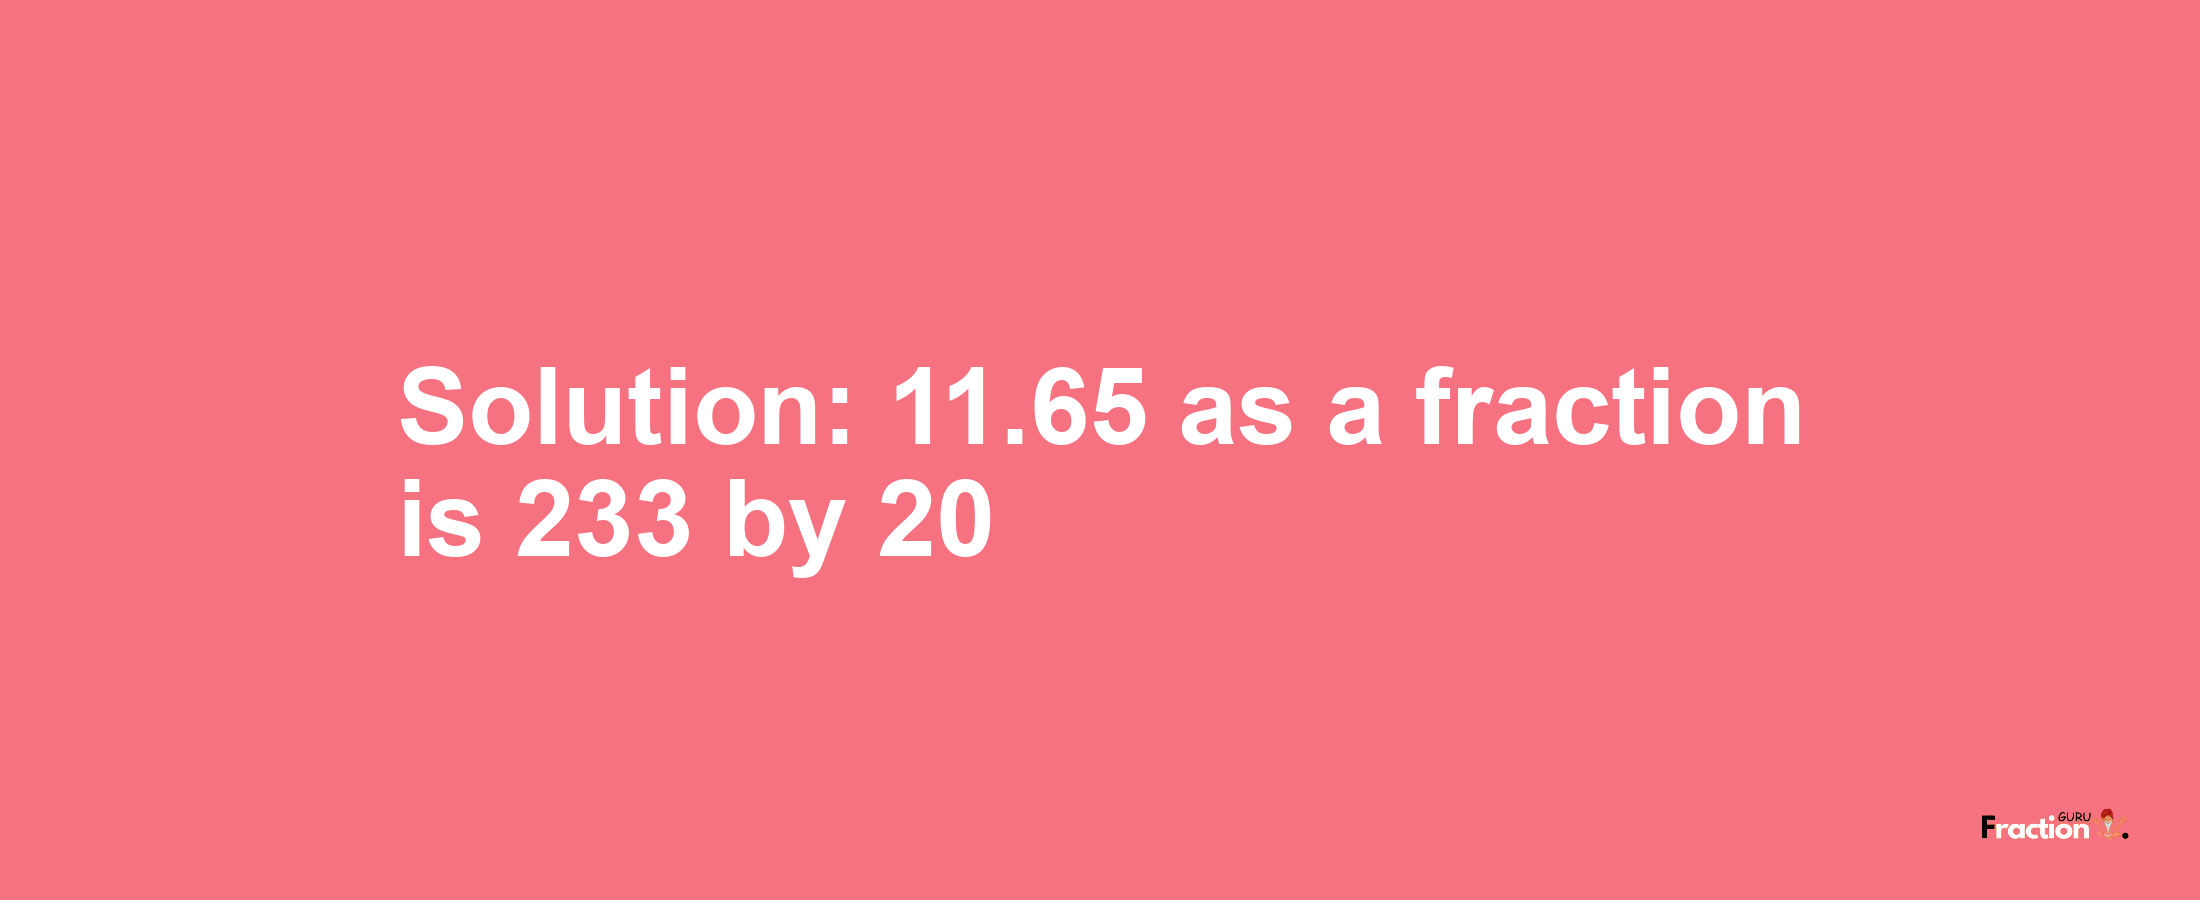 Solution:11.65 as a fraction is 233/20